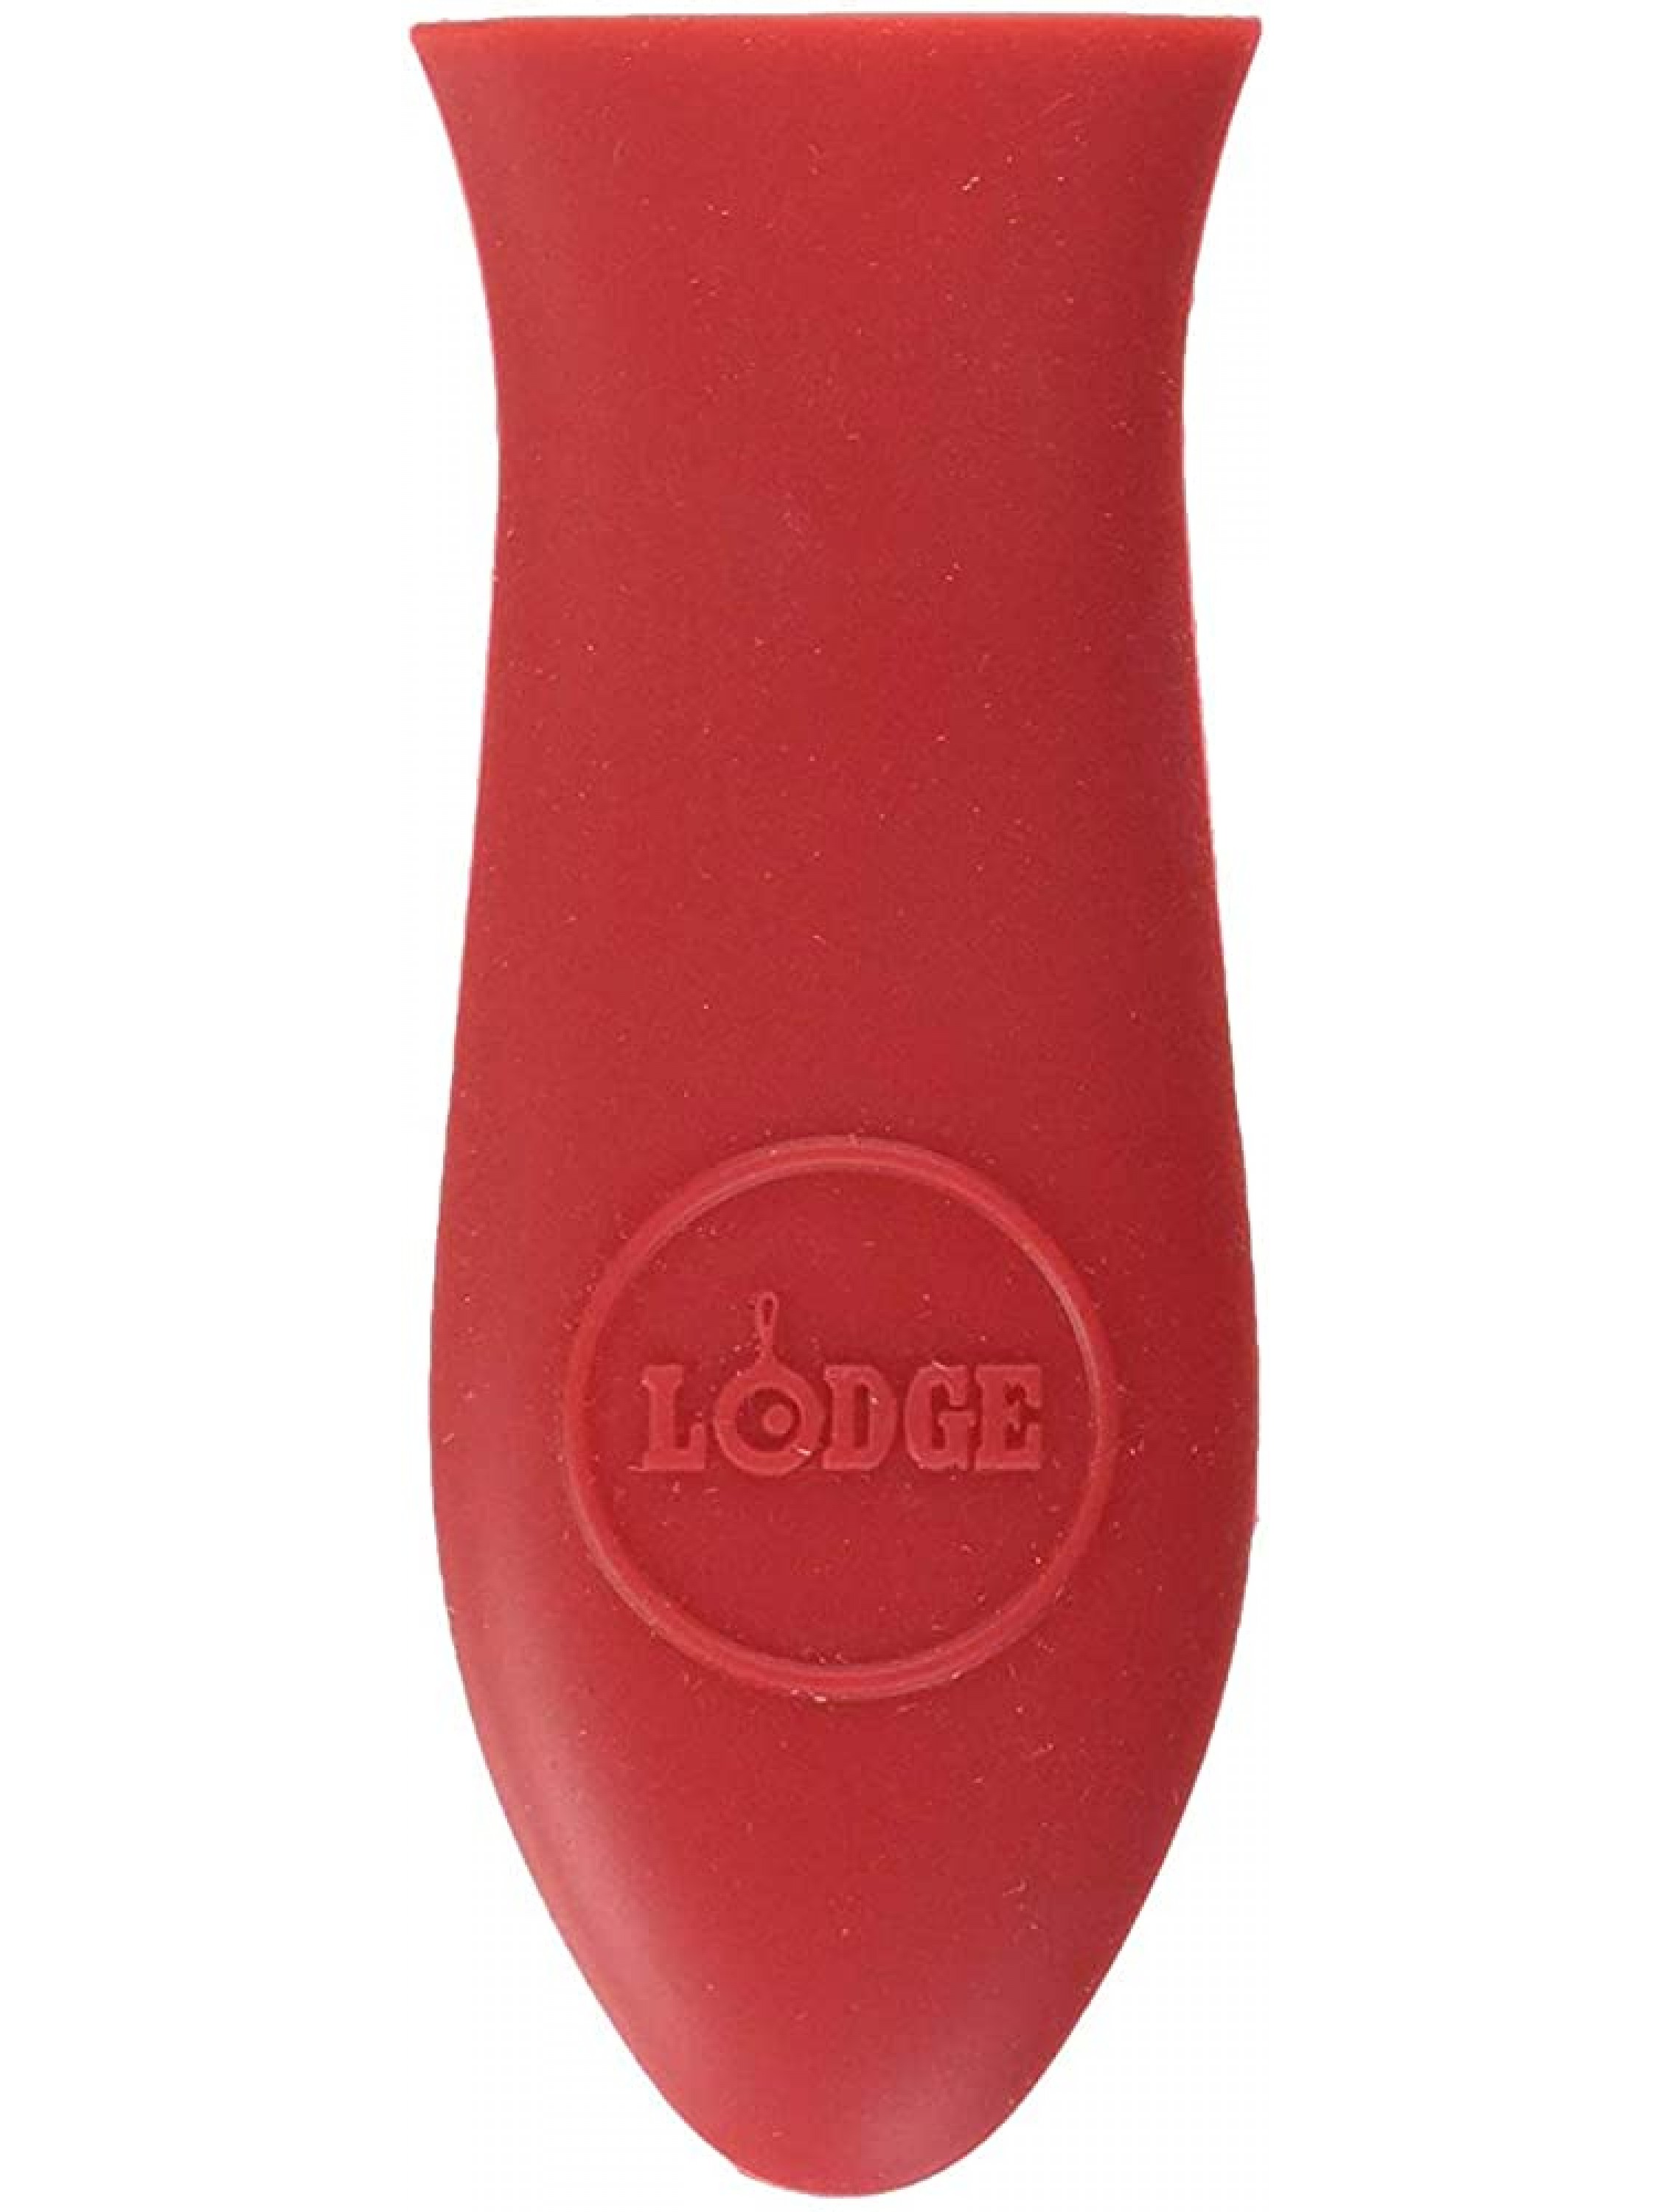 Lodge Manufacturing Company Silicone Hot Handle Holder 3-Inch Red - B8F4ETTSS